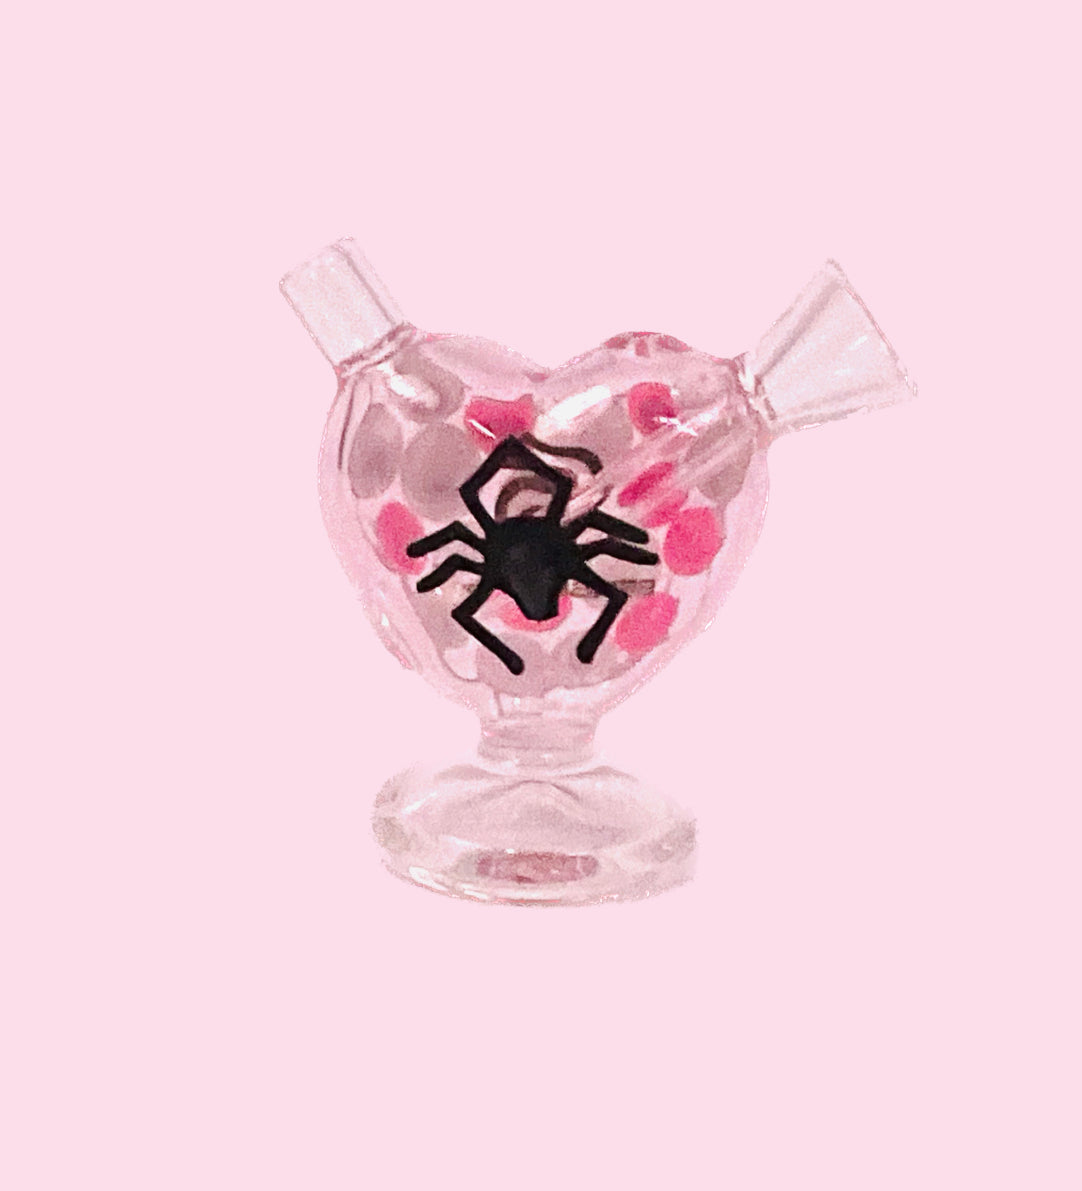 2.5 x 3" Tiny Pink Heart Pipe with Spider and Moving Eyes